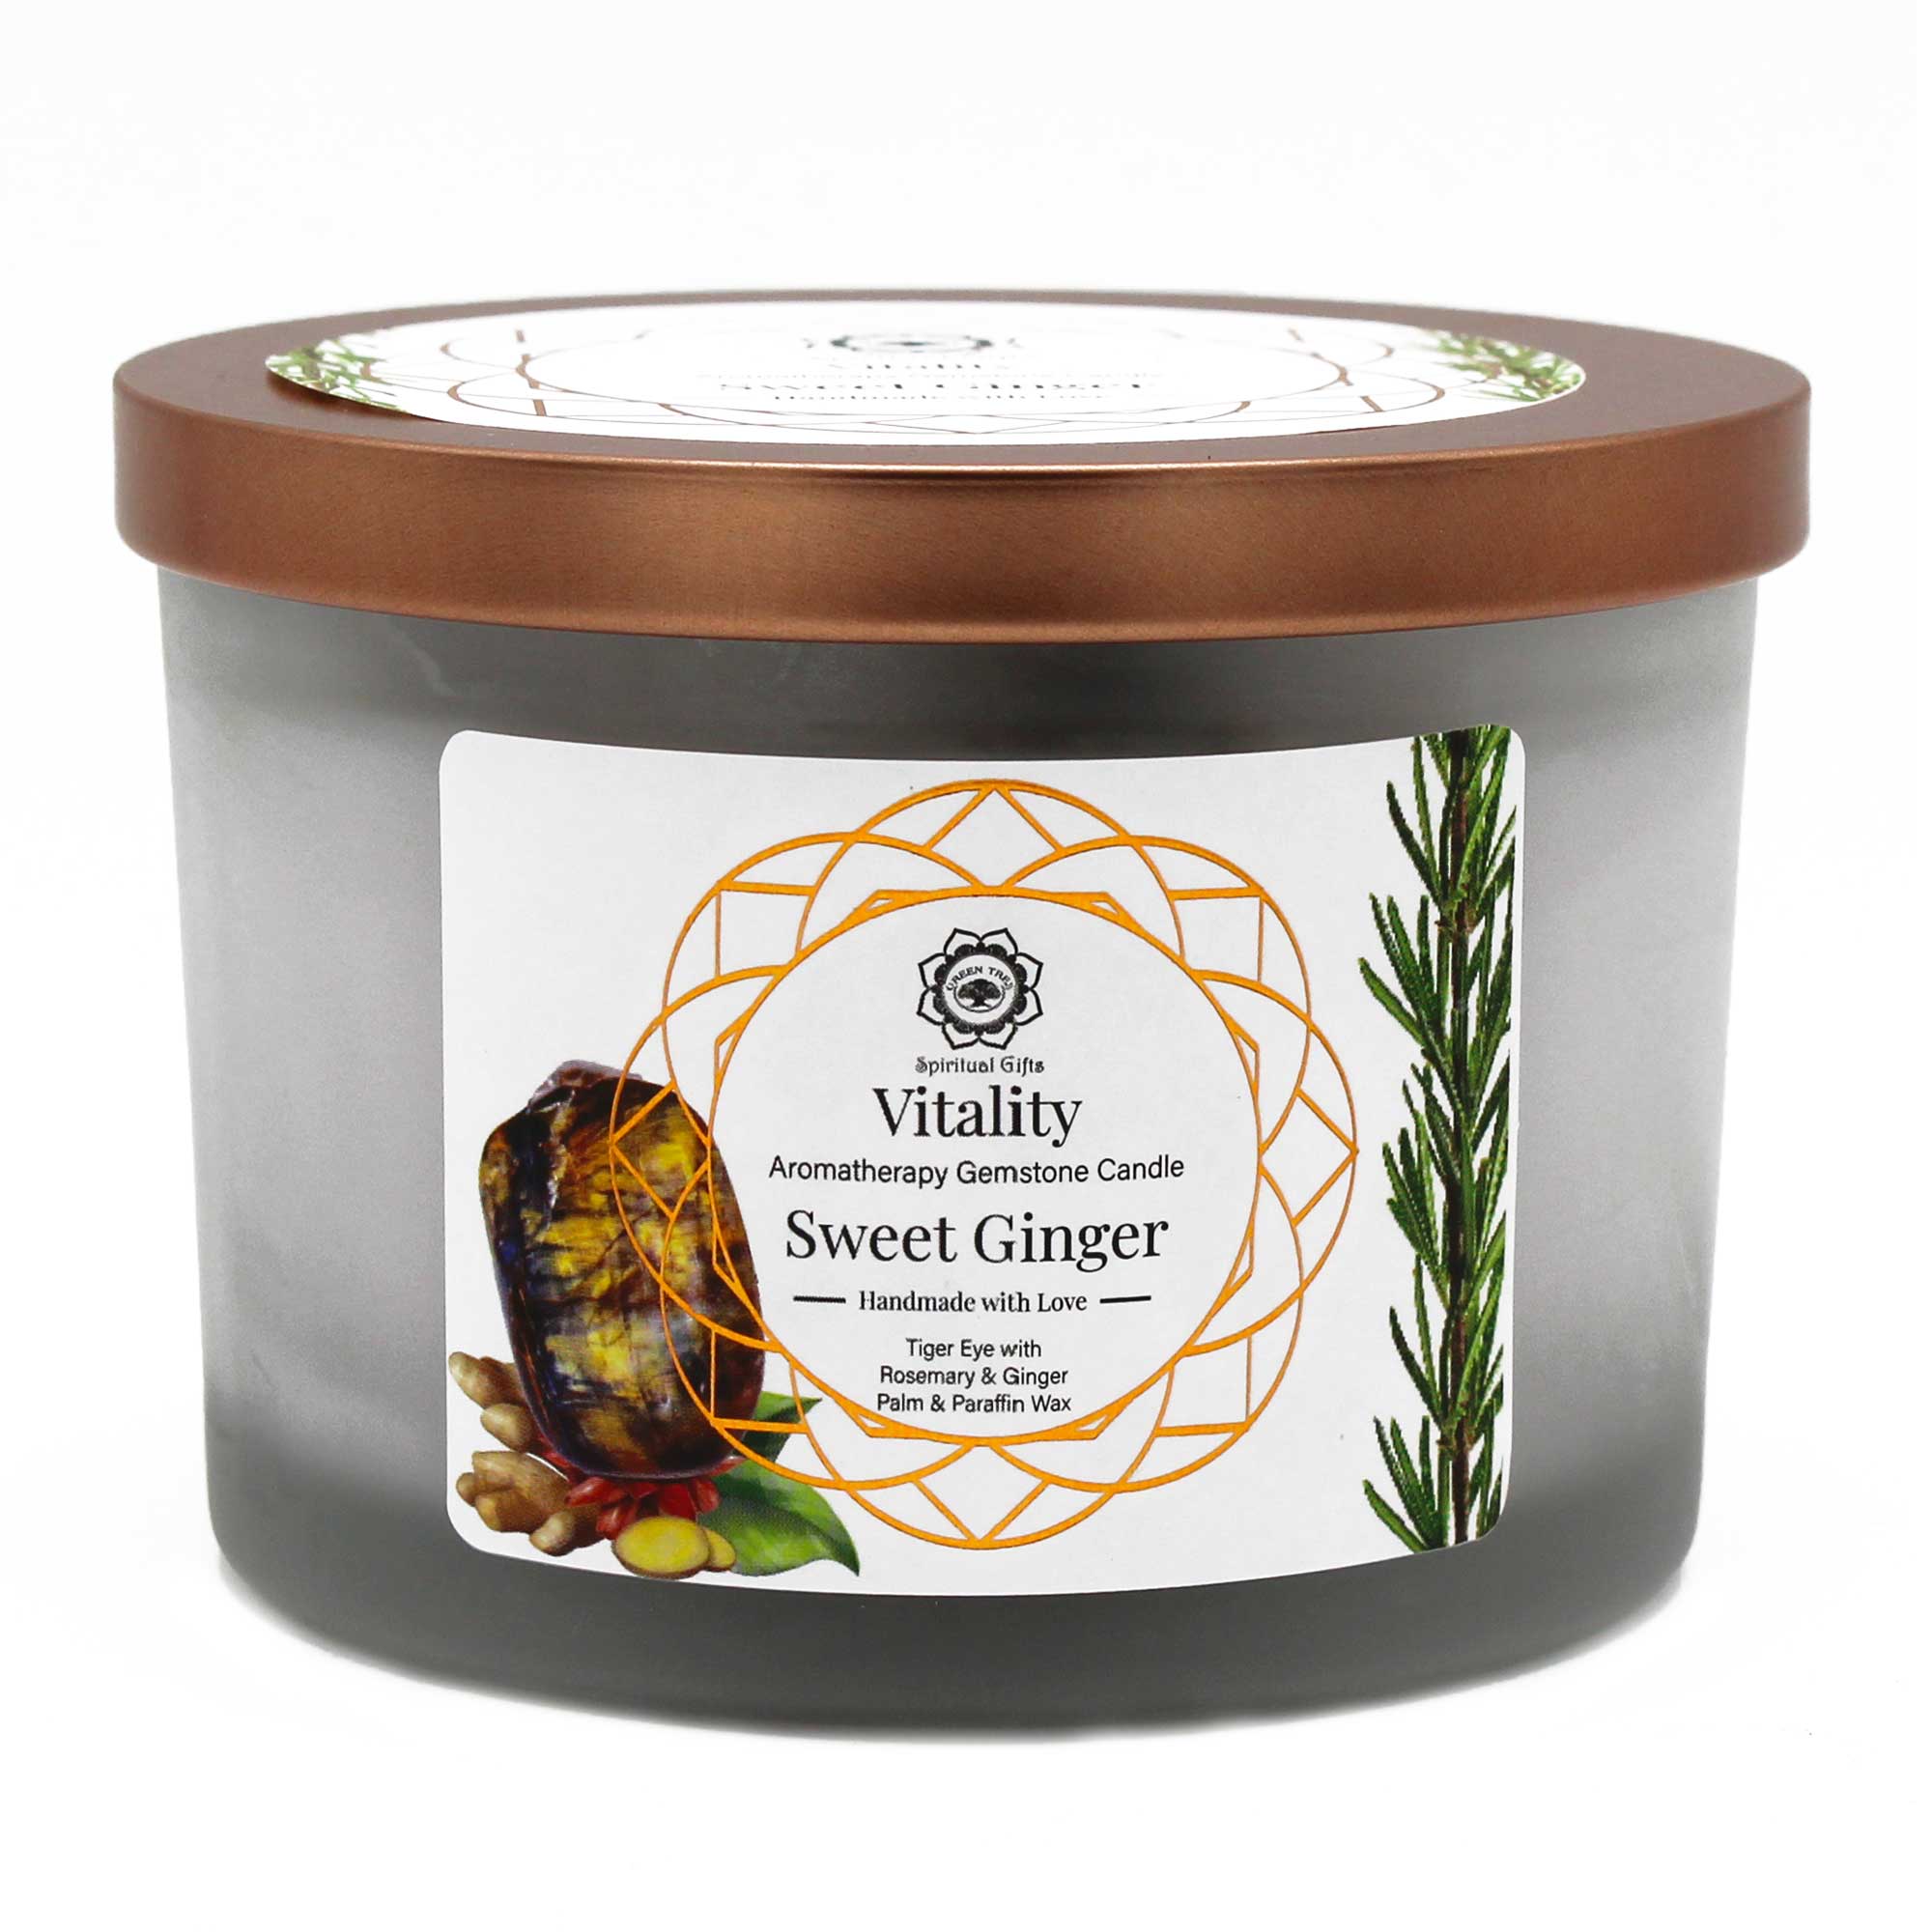 View Sweet Ginger and Tiger Eye Gemstone Candle Viality information